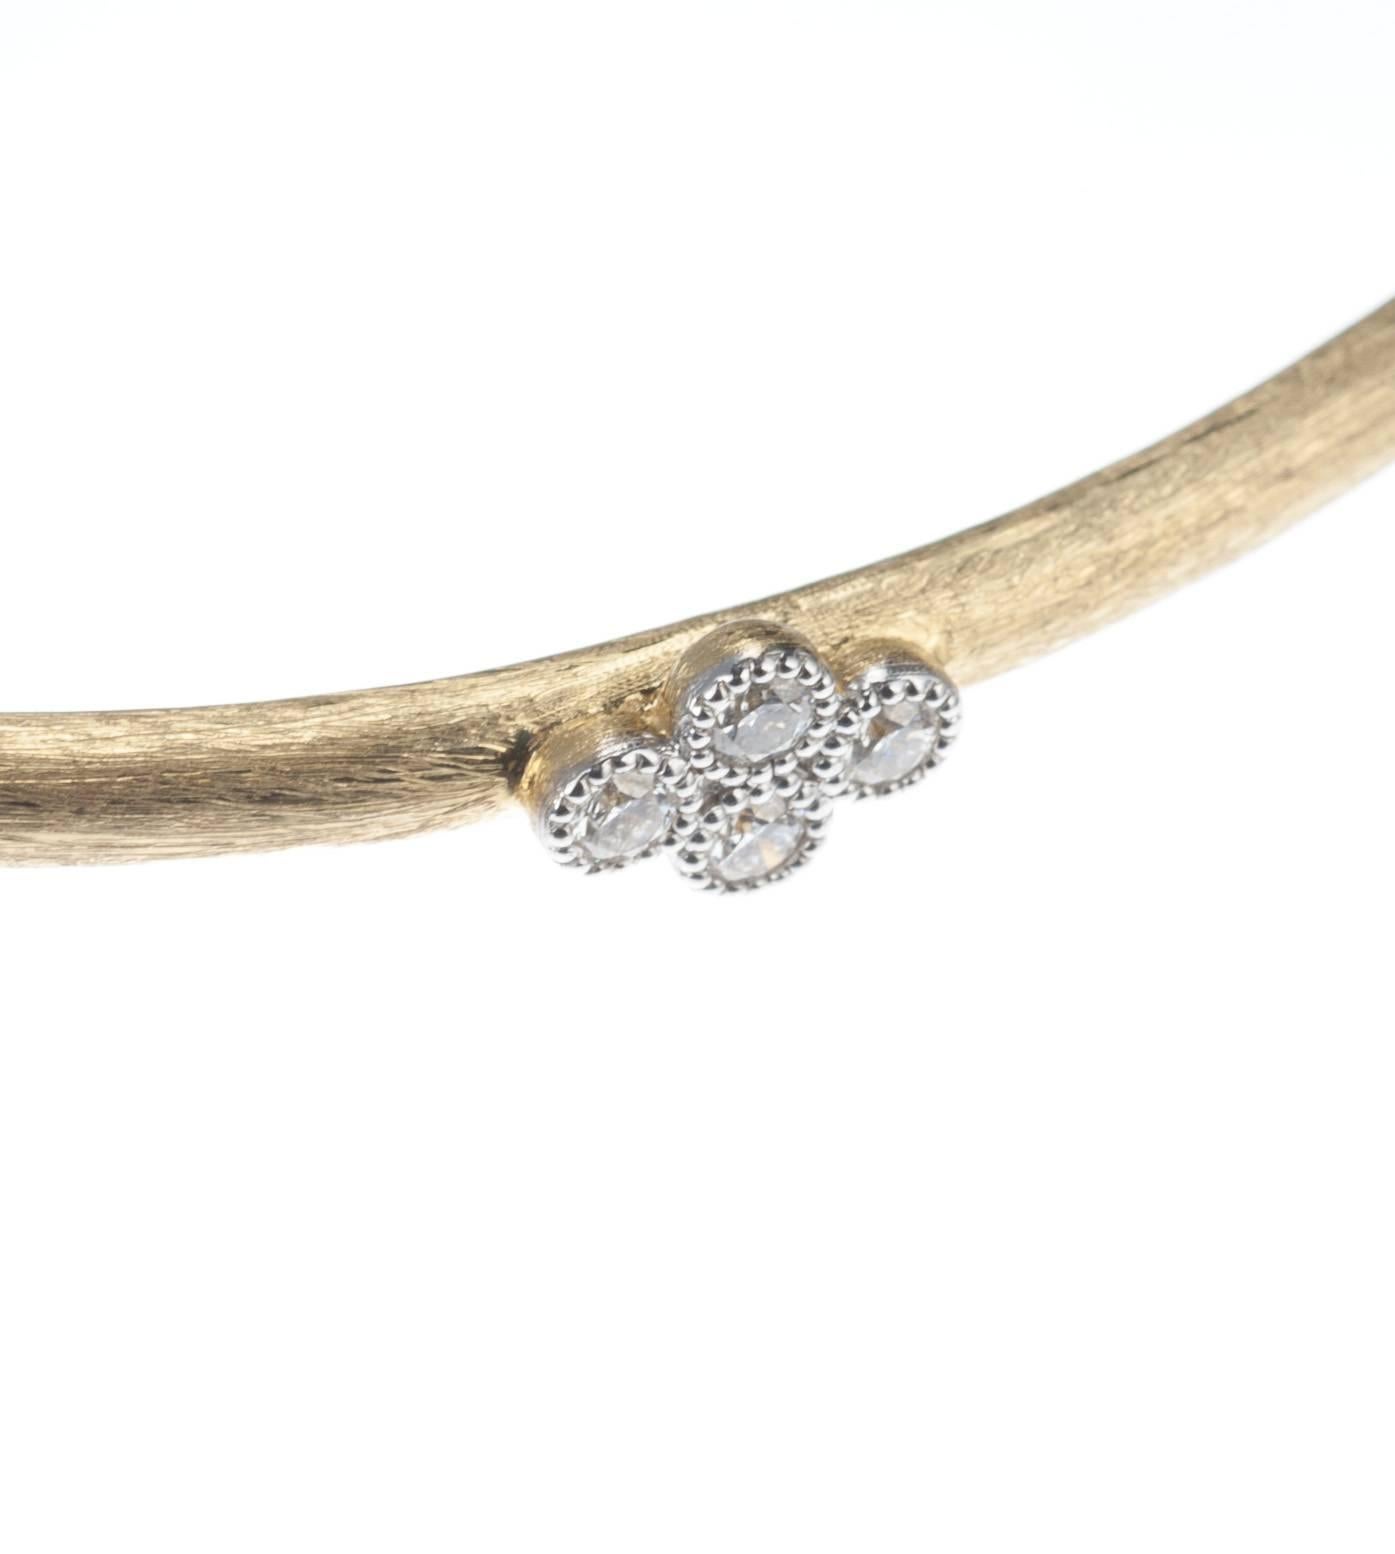 Part of the Provence collection from designer Jude Frances, a simple 18-karat yellow gold bangle bracelet applied with the designer’s signature Florentine-like finish and adorned with an 18-karat white gold quad of four diamonds, .12ctw. of G color